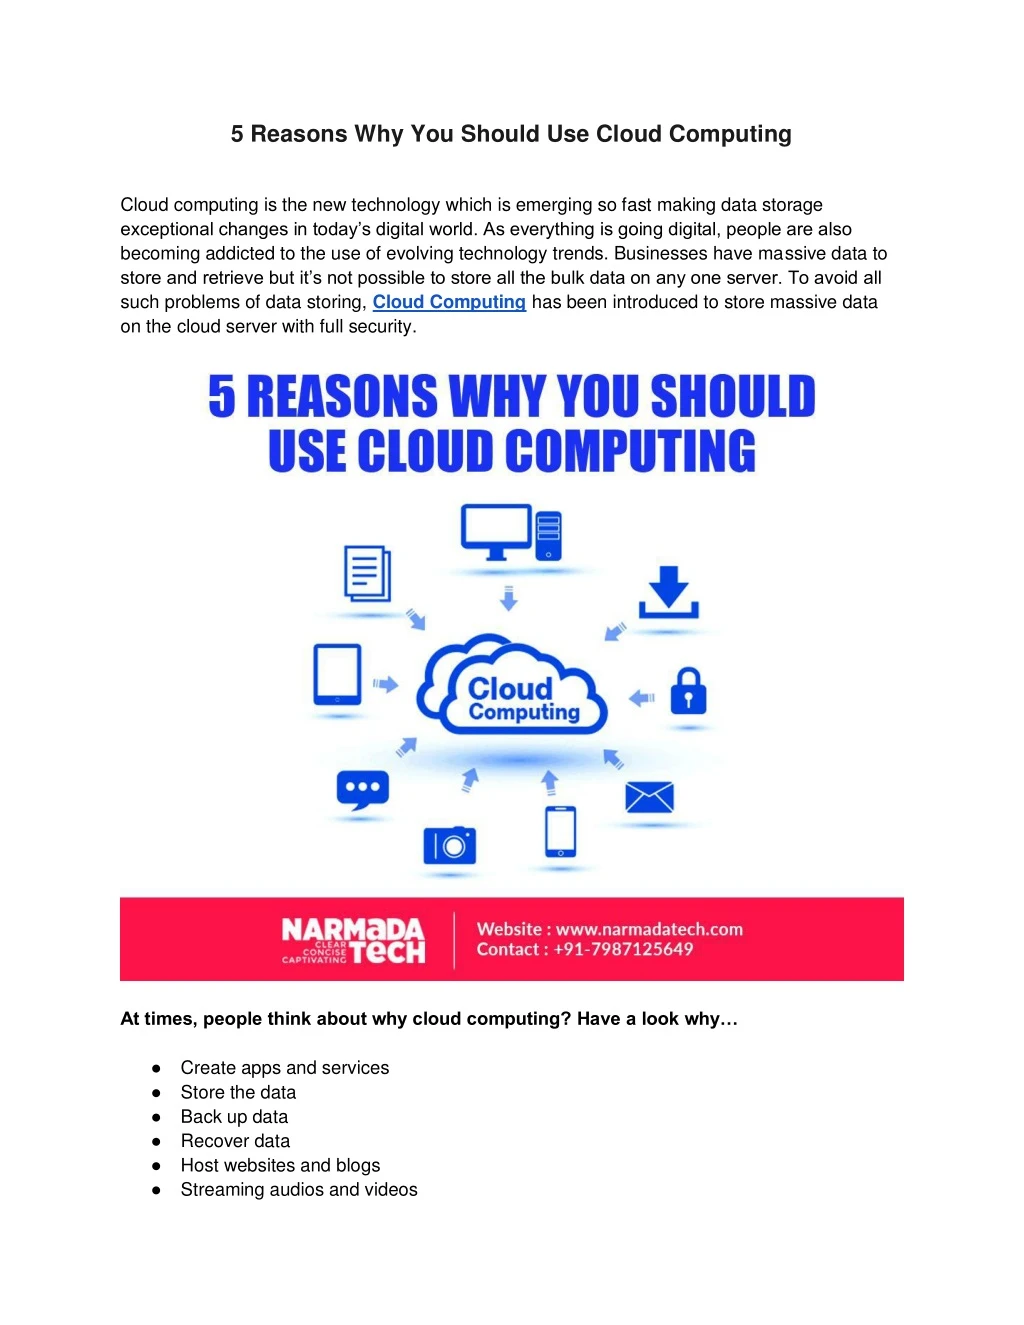 5 reasons why you should use cloud computing